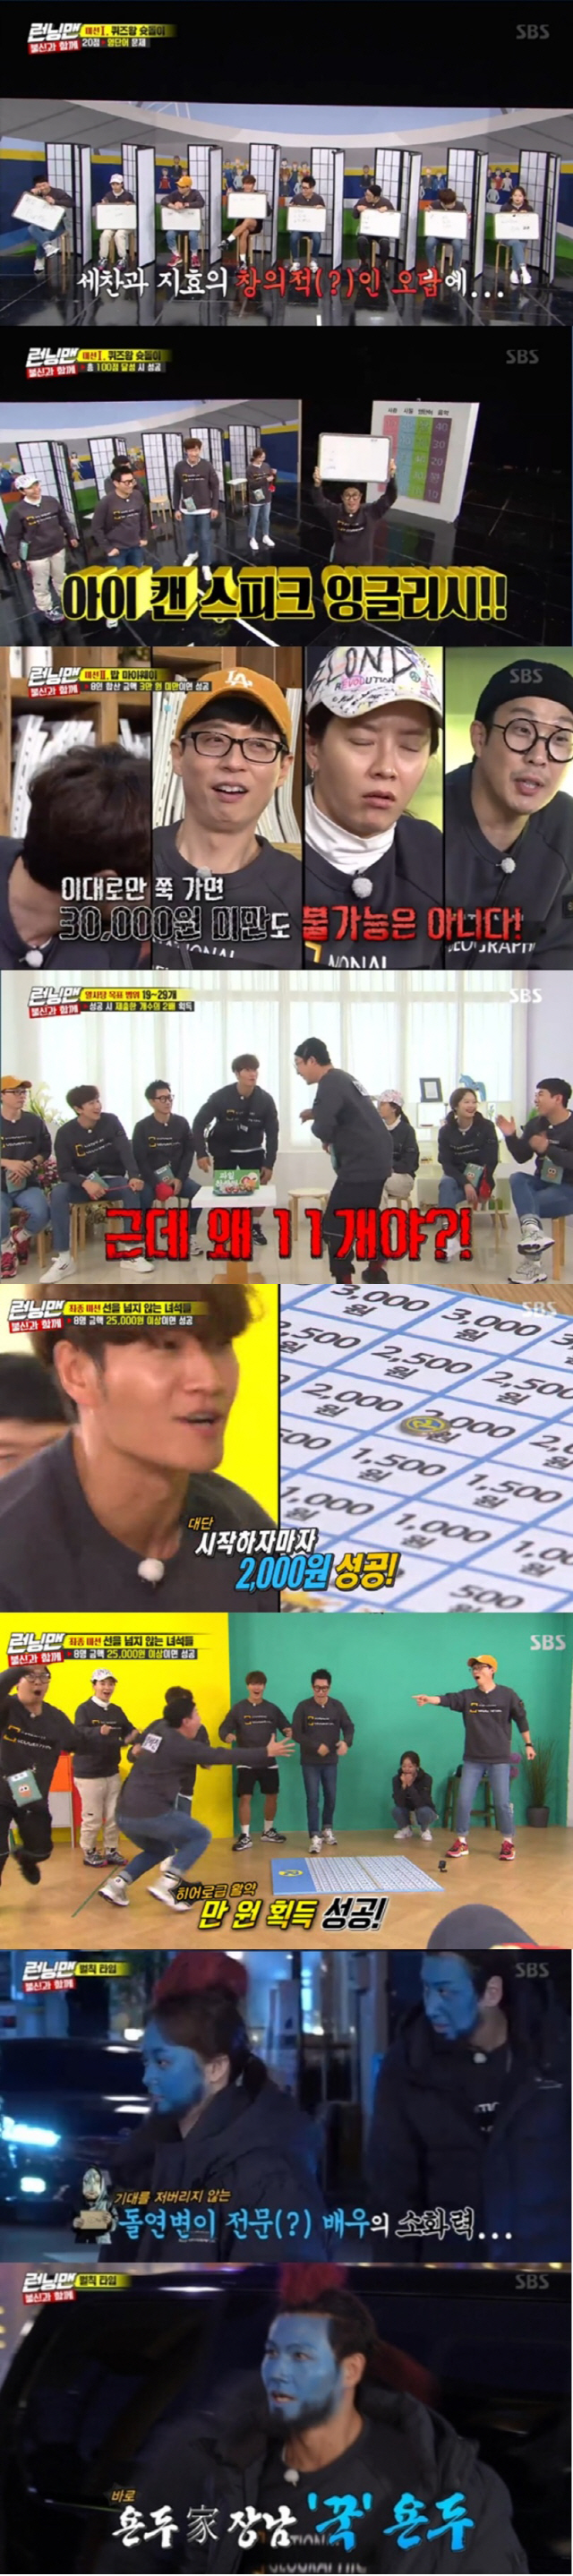 SBS Running Man kept the top spot in the same time zone of 2049 target TV viewer ratings.The broadcast was featured in a special united race with distrust, which was set up for members who had been suspicious and fraught in the past few weeks.In the first mission, The King of Quiz had to be unanimously correct, with all kinds of fouls and the wrong answers of Jeon So-min, but the correct answers came out.In the second mission Bob My Way, Jeon So-min was prominent.One of the eight different menus with different prices was private, and if the sum was less than 30,000 won, it was a power pass.With Ji Suk-jin opting for a high-priced soy sauce, Jeon So-min chose a boiled egg and all the members ate well.On the other hand, the third mission, Answer the Category, which is successful when all the people say the category presented in 8 seconds, failed, and once again the members distrust raised their heads and laughed.Fortunately, in the final mission The Guys who do not cross the line, Yang Se-chan won a 10,000 won in his performance and gave a warm heart.Yang Se-chan won the penalty exemption by ranking first by member, and the penalty was confirmed when Jeon So-min and Lee Kwang-soo were ranked 7th and 8th.The penalists Jeon So-min and Lee Kwang-soo had to sell Bungeo-pang on the street with the Running Man-pyo Megahit makeup Yondu makeup, and pointed out Kim Jong-kook as additional penalties.The three humiliation sales sites rose to 8.4% of the highest TV viewer ratings per minute, accounting for the best one minute.